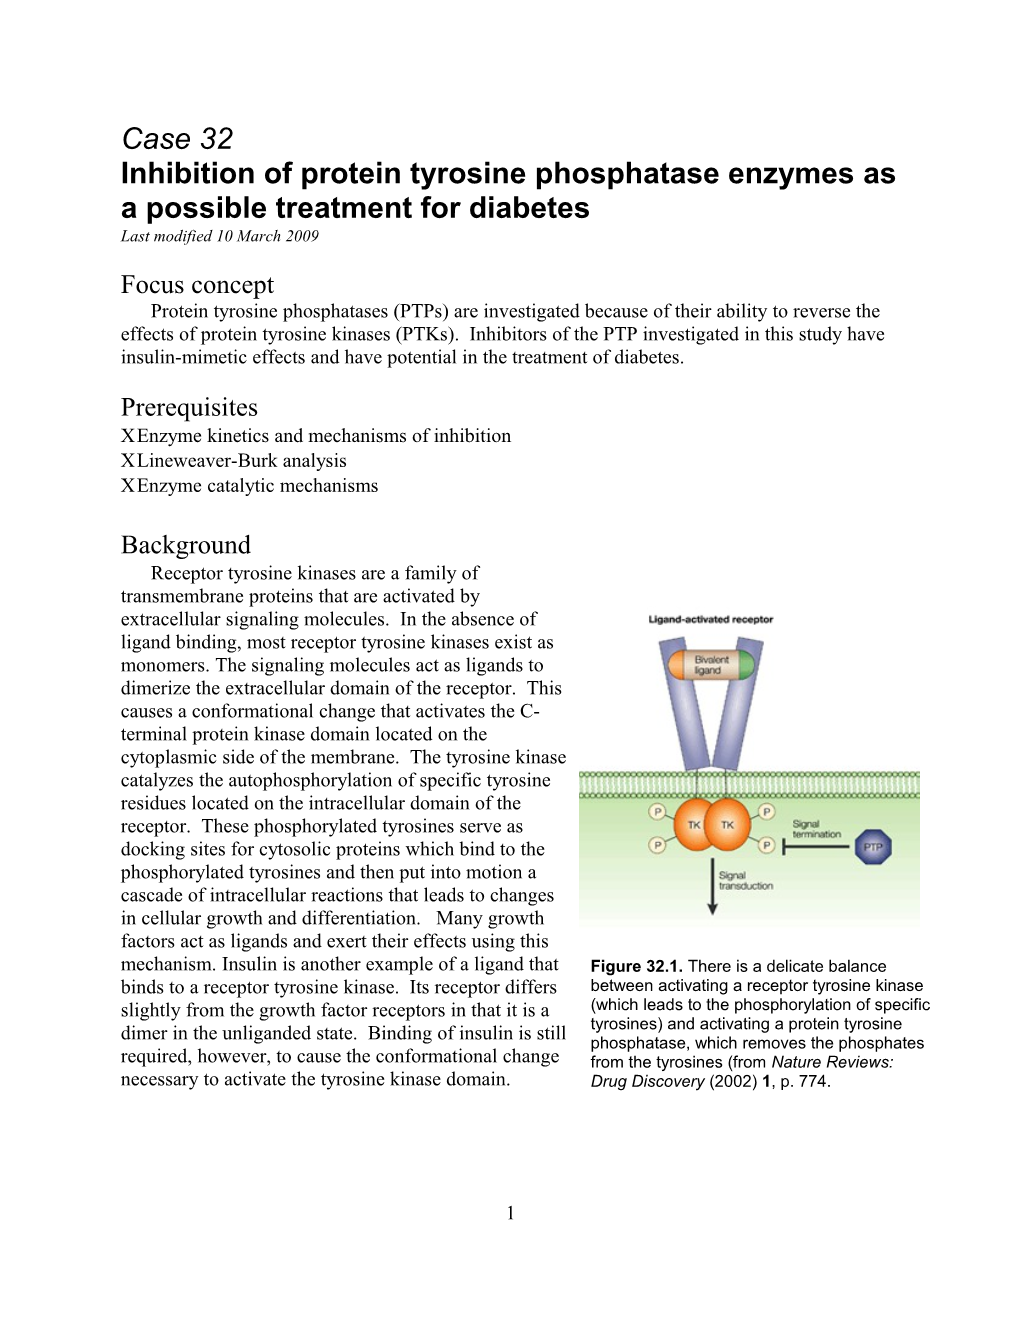 Inhibition of Protein Tyrosine Phosphatase Enzymes As a Possible Treatment for Diabetes